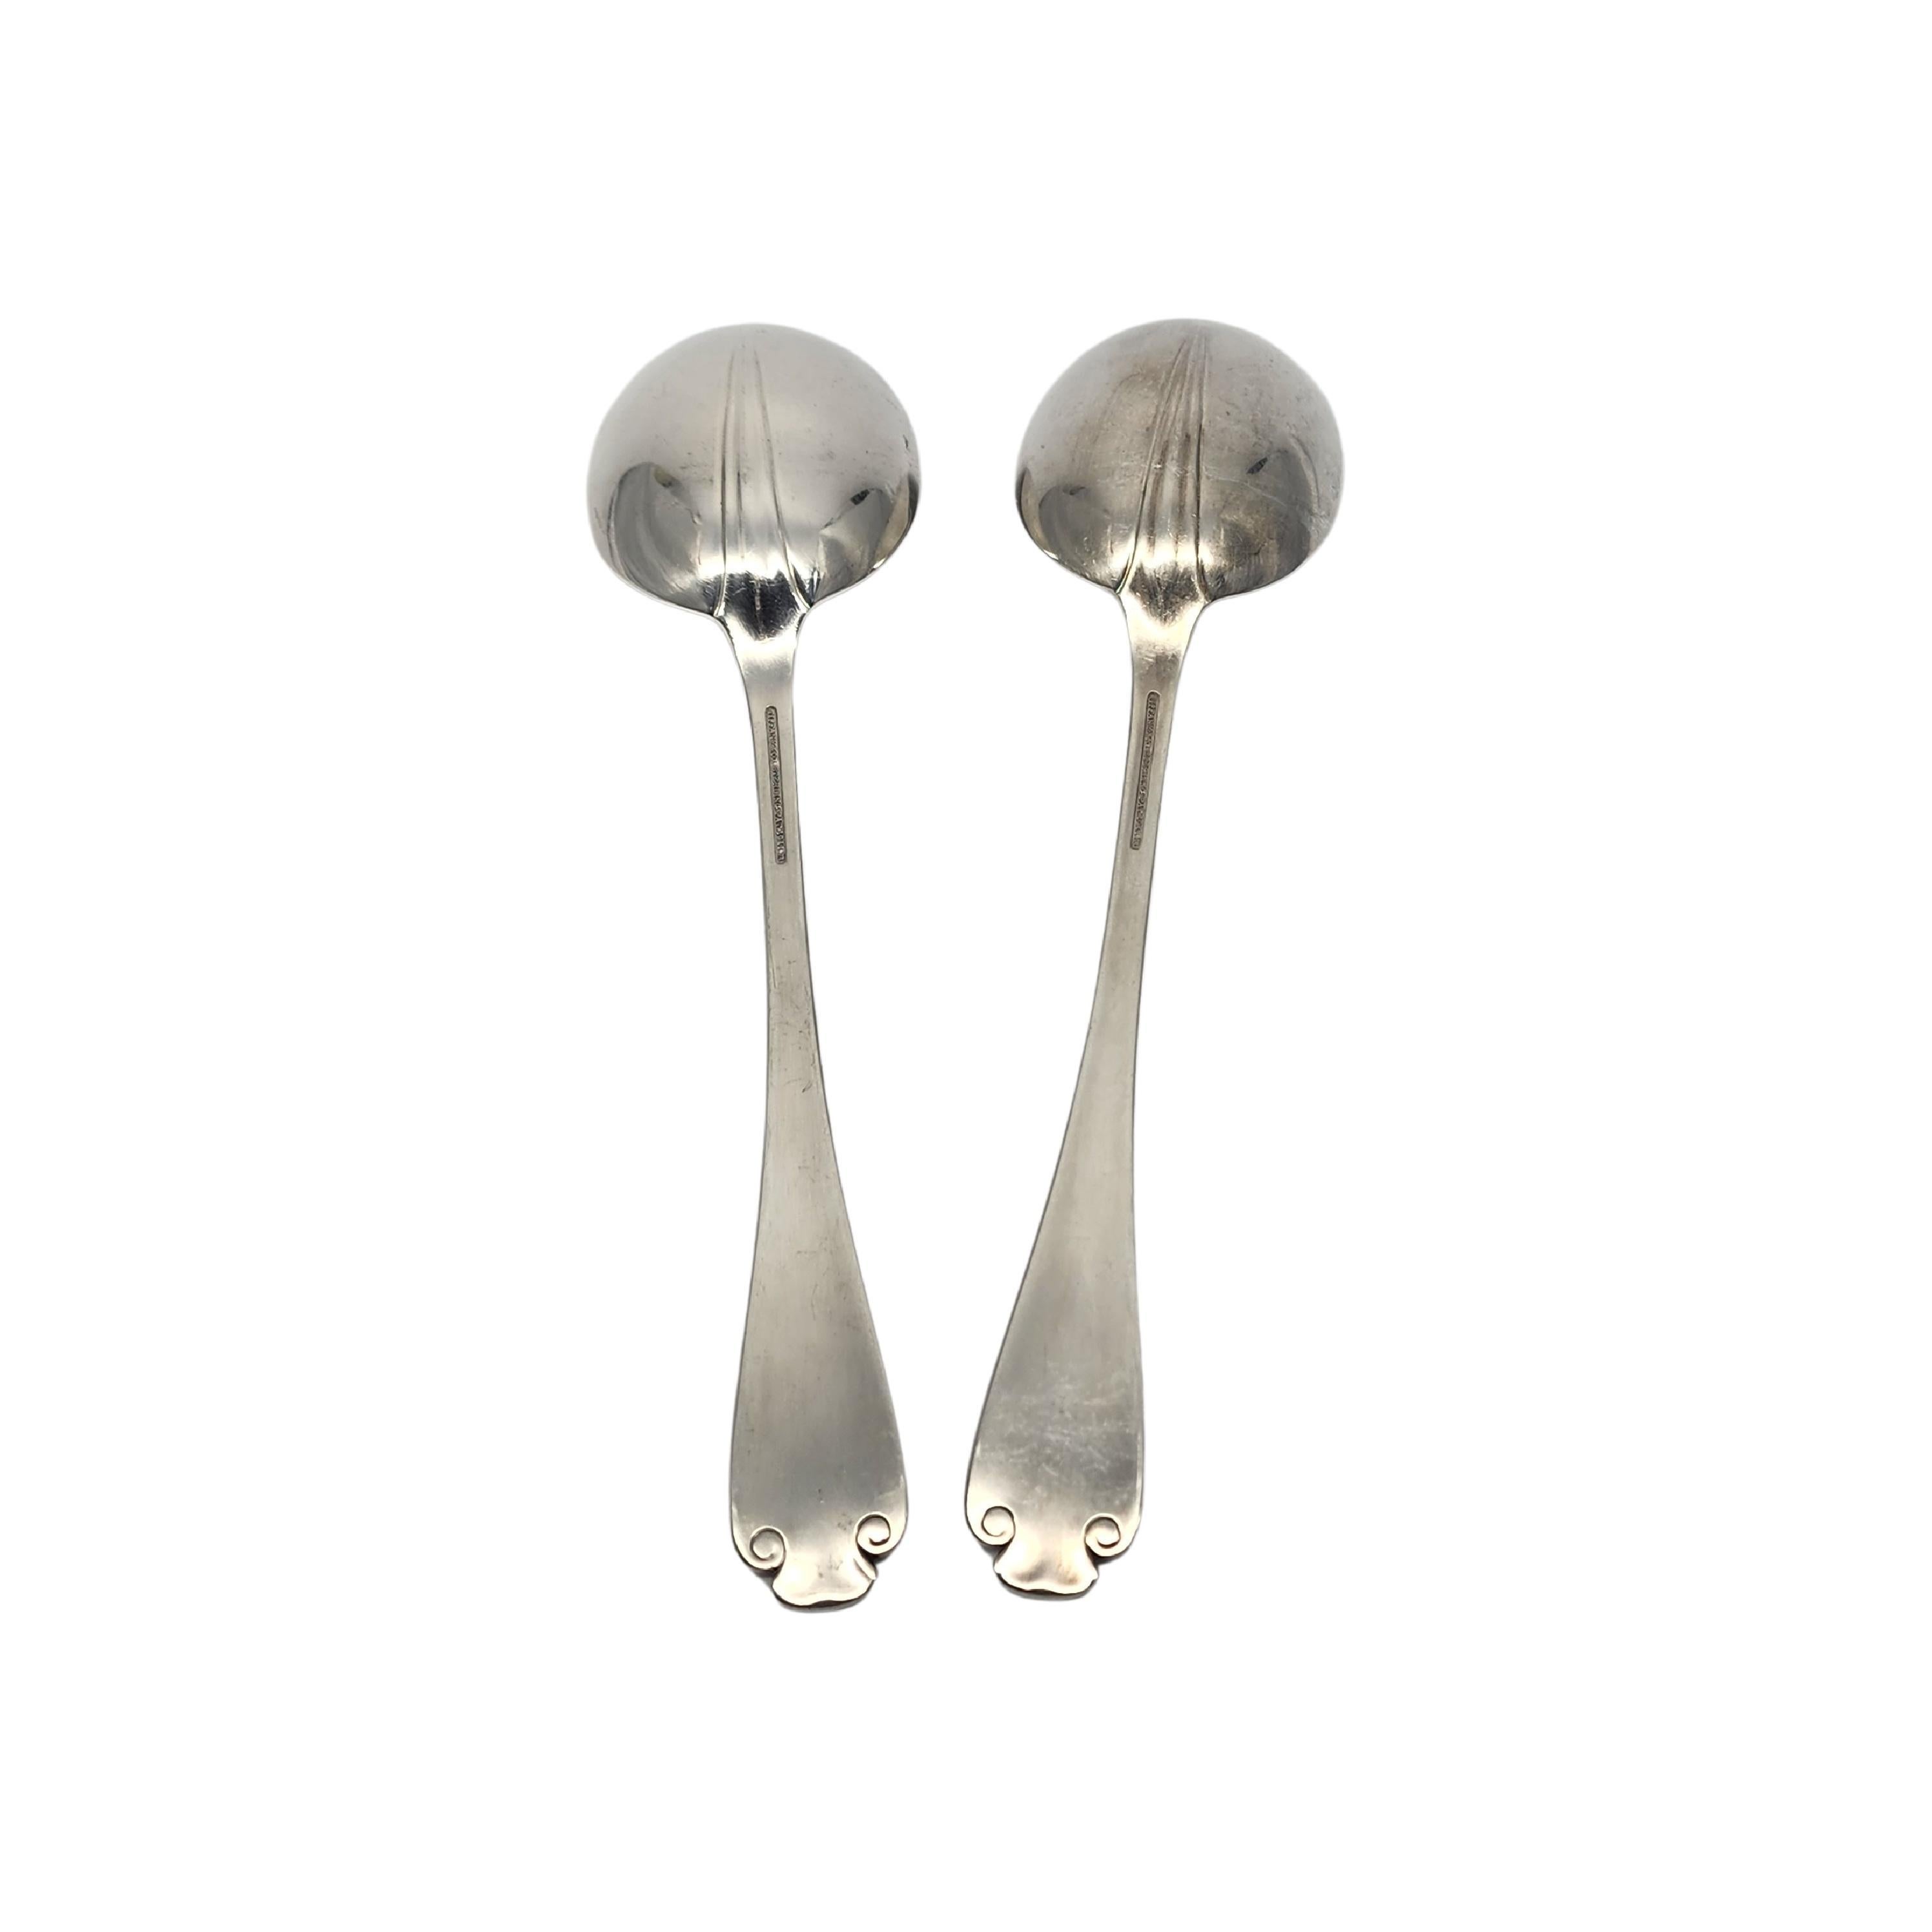 Set of 2 sterling silver serving vegetable spoons by Tiffany & Co in the Flemish pattern.

No monogram.

The Flemish pattern features a simple and elegant scroll design, making it a timeless classic that is still in demand today. Hallmarks date